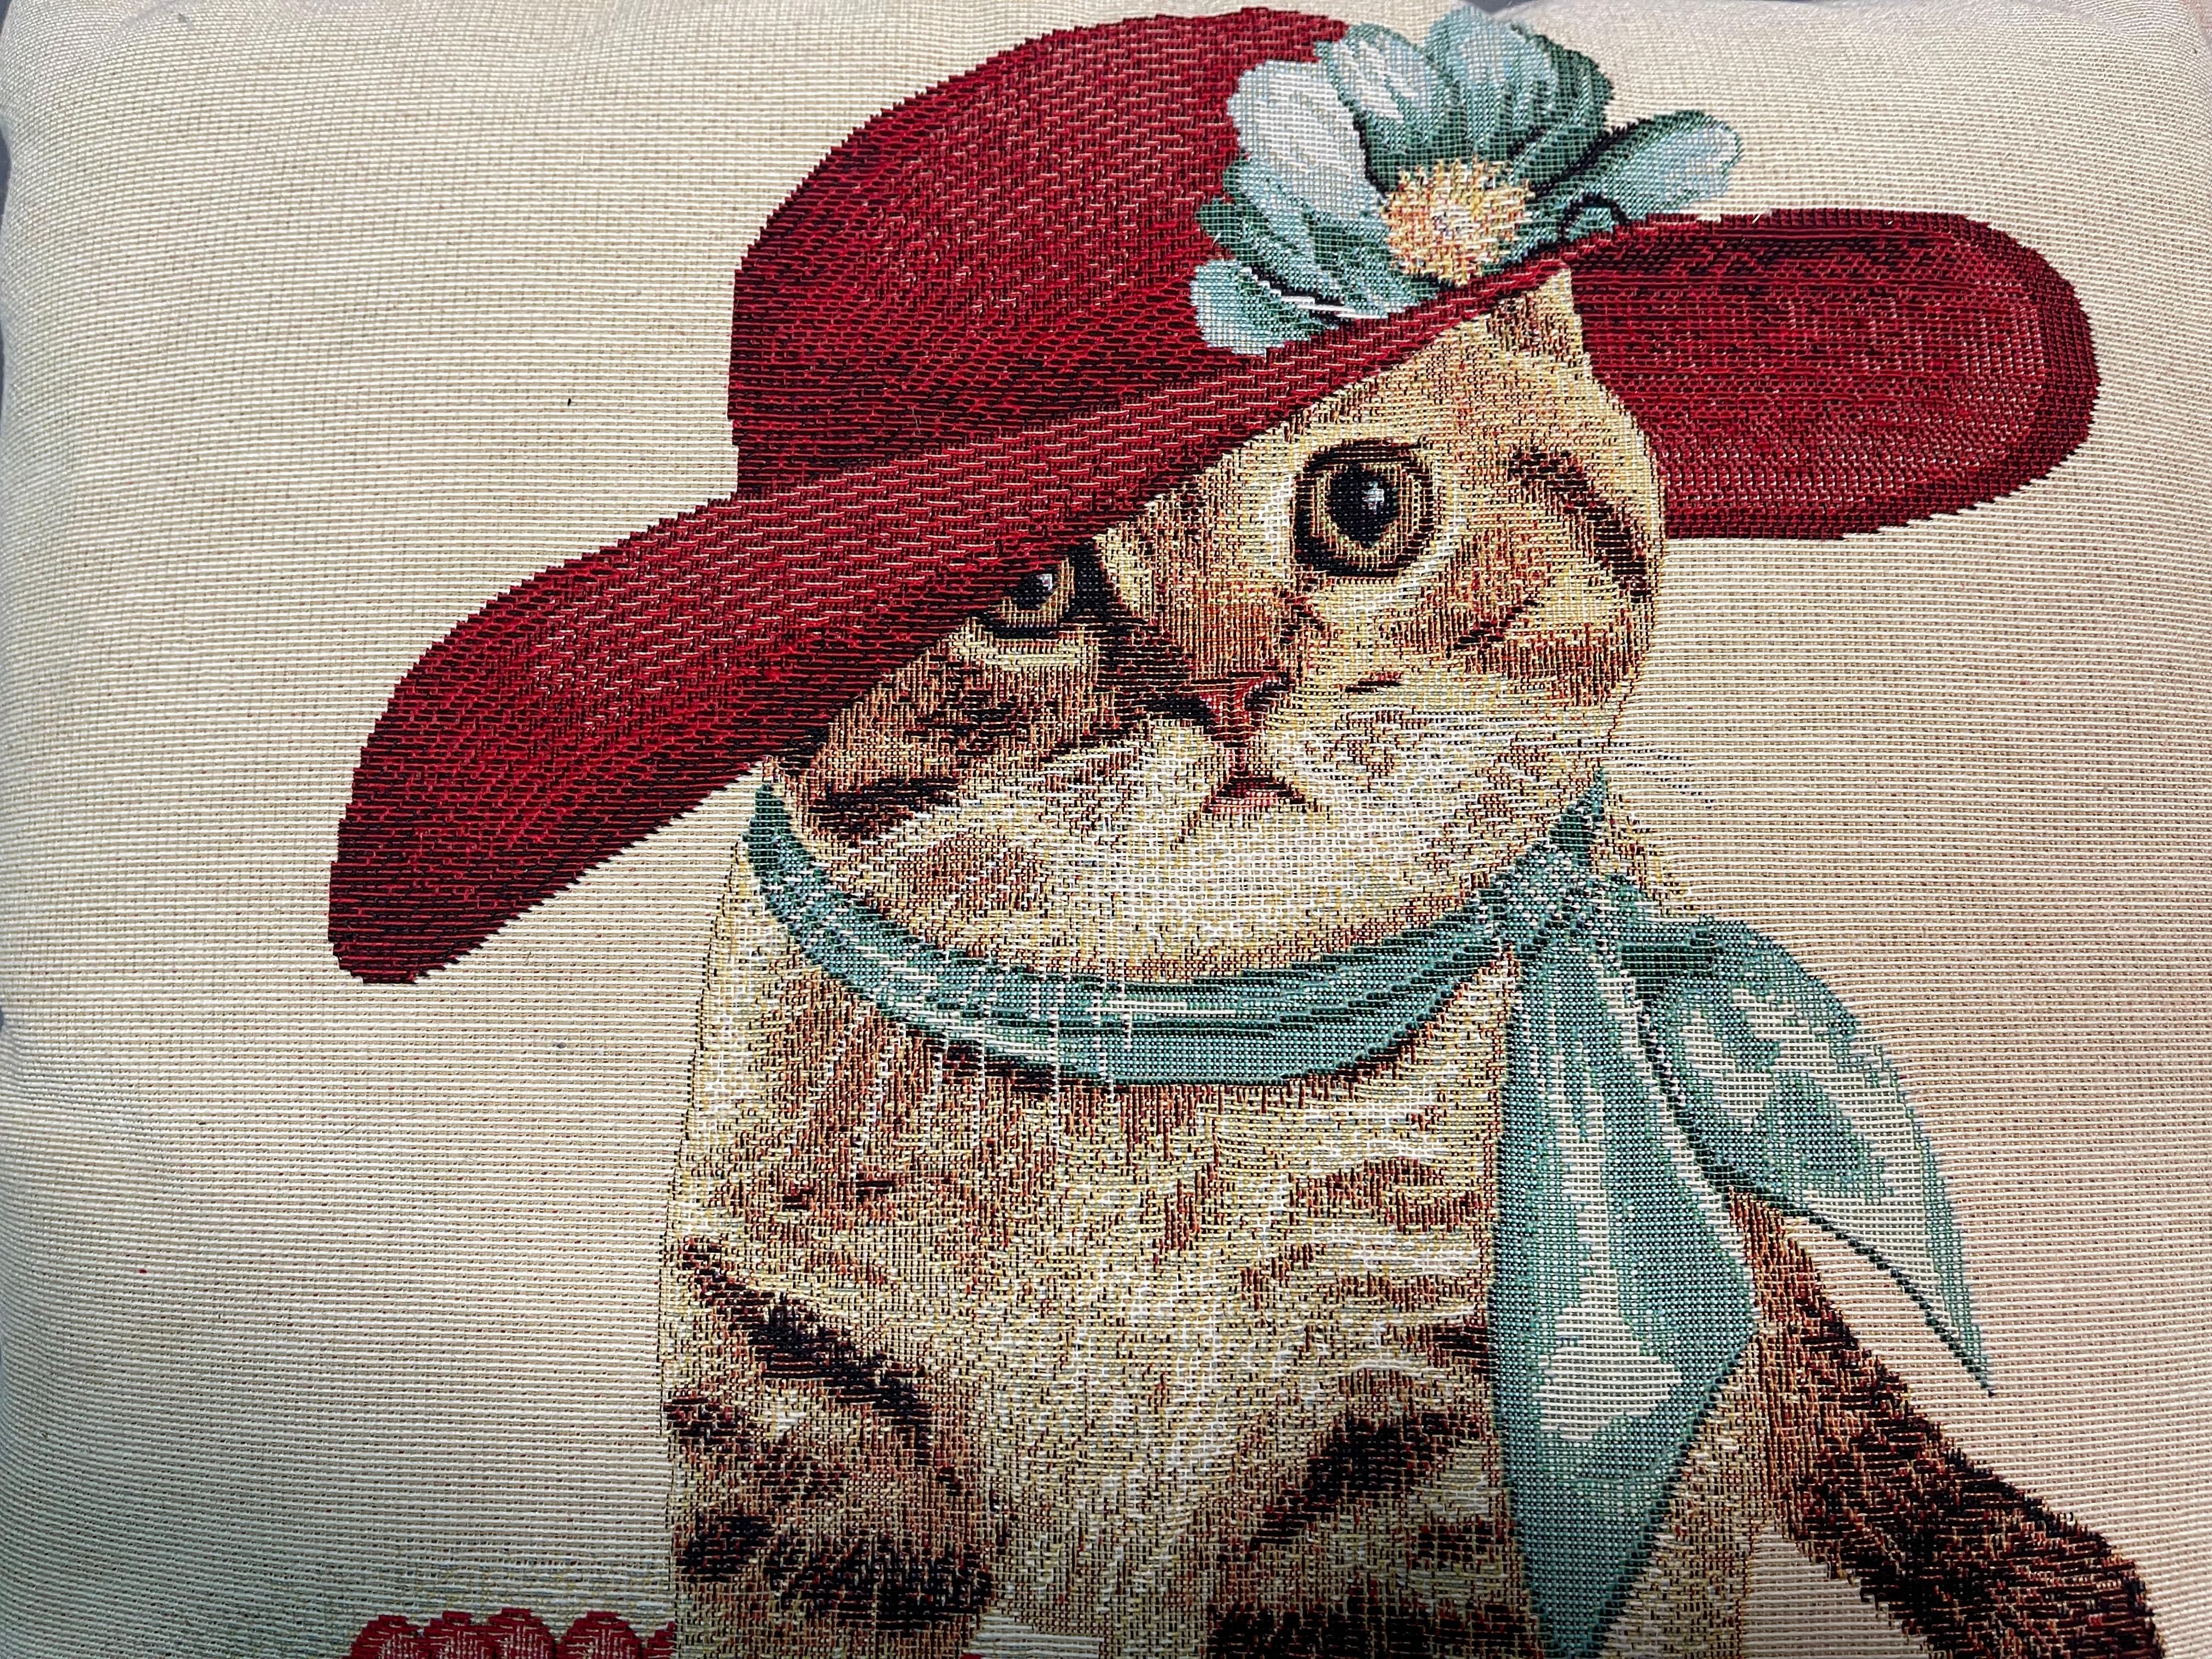 Veru nice vintage pillow representing an irresistible cat wearing a hat 

Every item of our Gallery, upon request, is accompanied by a certificate of authenticity issued by Sabrina Egidi official Expert in Italian furniture for the Chamber of